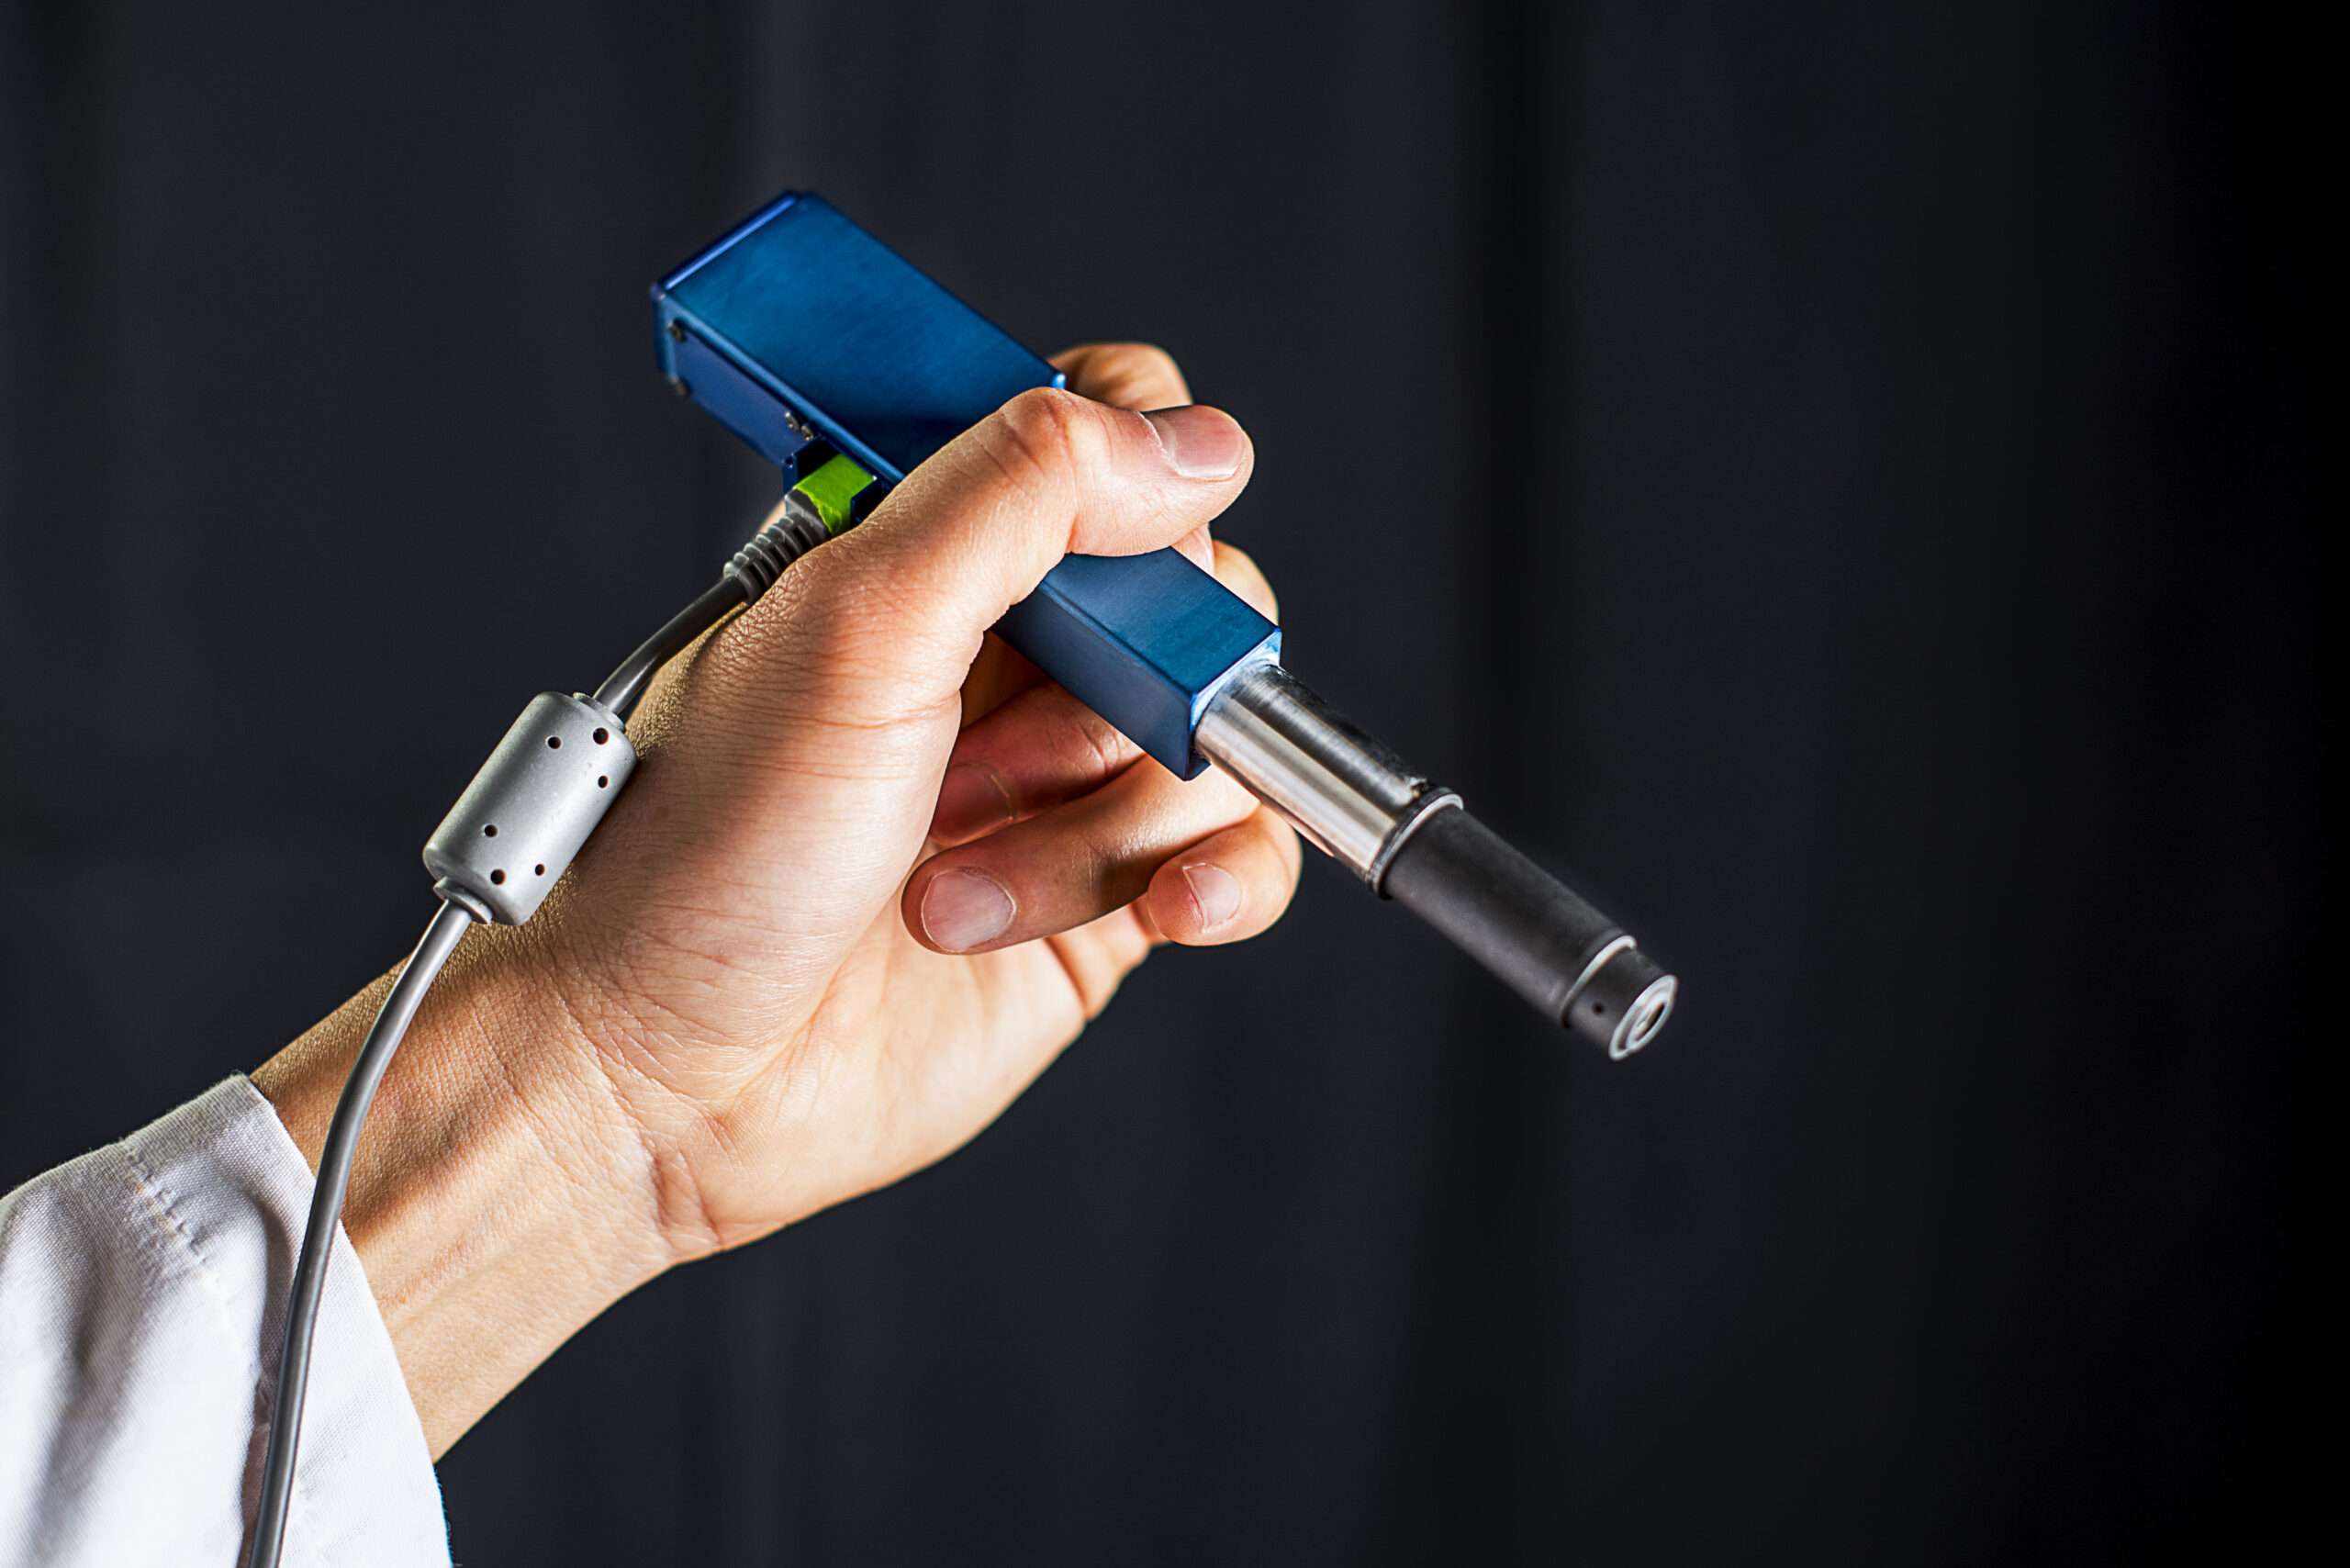 Handheld microscope identifies cancer cells during surgery